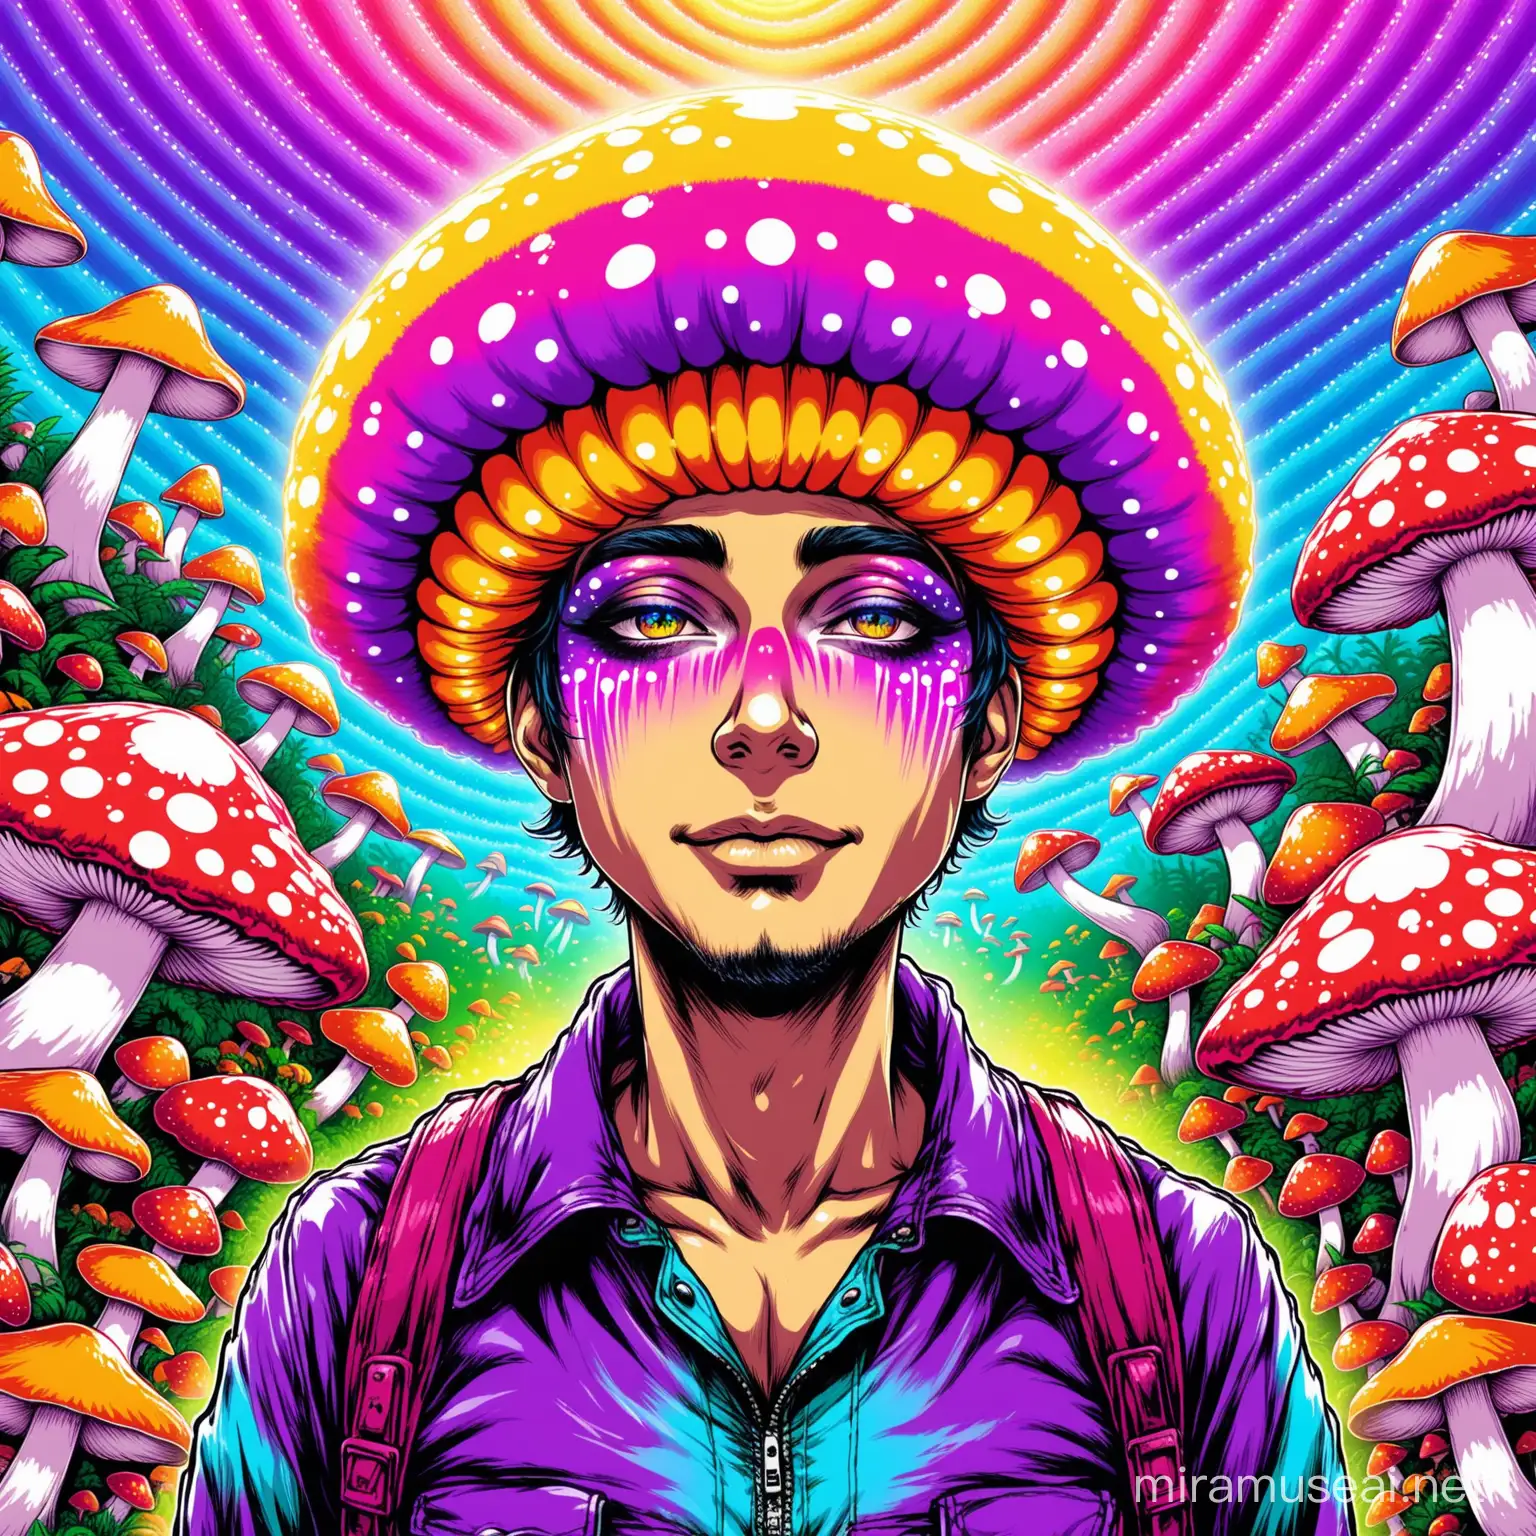 A queer guy with very contrasted makeup having a trip on shrooms psychadelic art